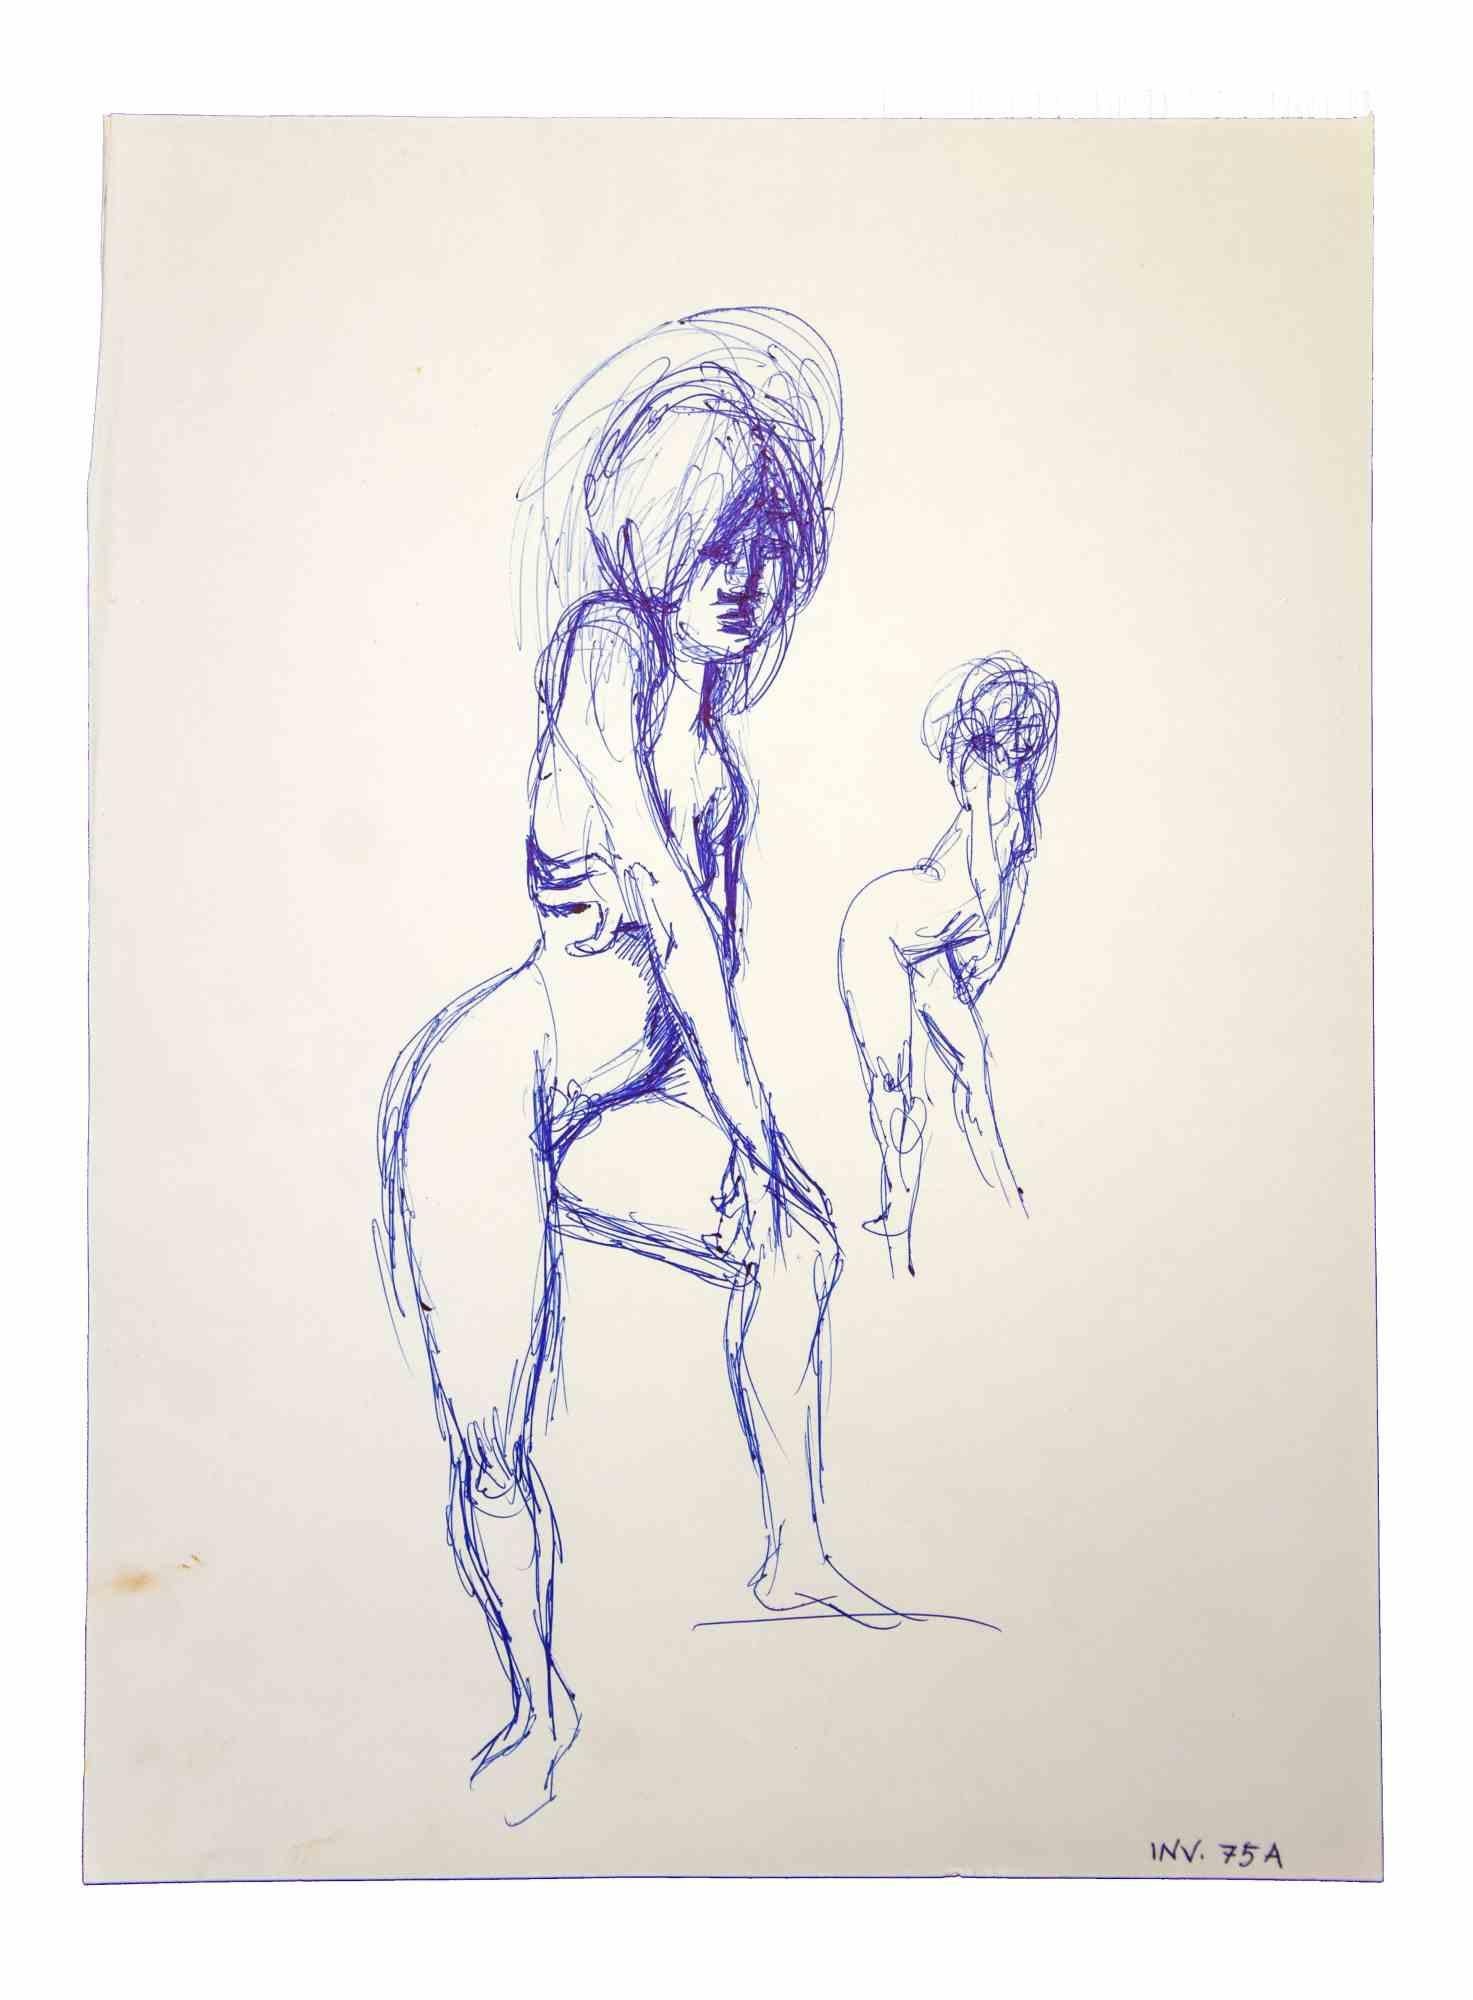 Stretching Nudes is an original artwork realized in the 1970s by the Italian Contemporary artist  Leo Guida  (1992 - 2017).

Original pen drawing on paper.

Good conditions.

Leo Guida  (1992 - 2017). Sensitive to current issues, artistic movements